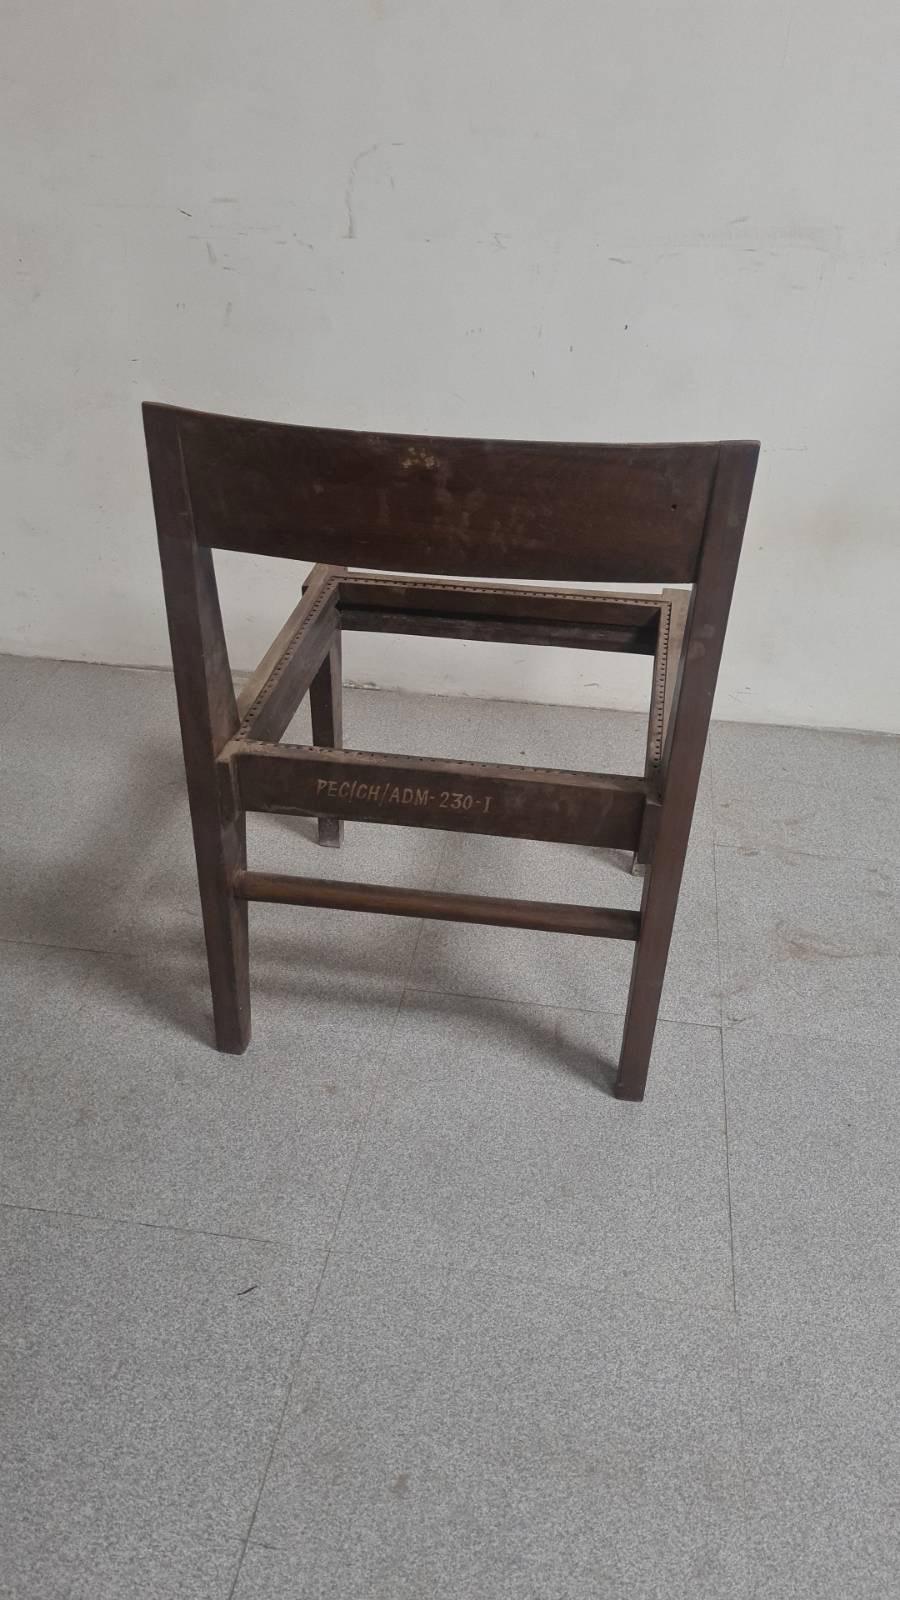 Pierre Jeanneret Model PJ-010514 Demountable Teak Chairs Circa 1955

Rare and important pair of Pierre Jeanneret Model PJ-010514 Teak Demountable Chairs (Chaise En Teck) Chandigarh India circa 1955, the chairs assembled with nuts and bolts, the